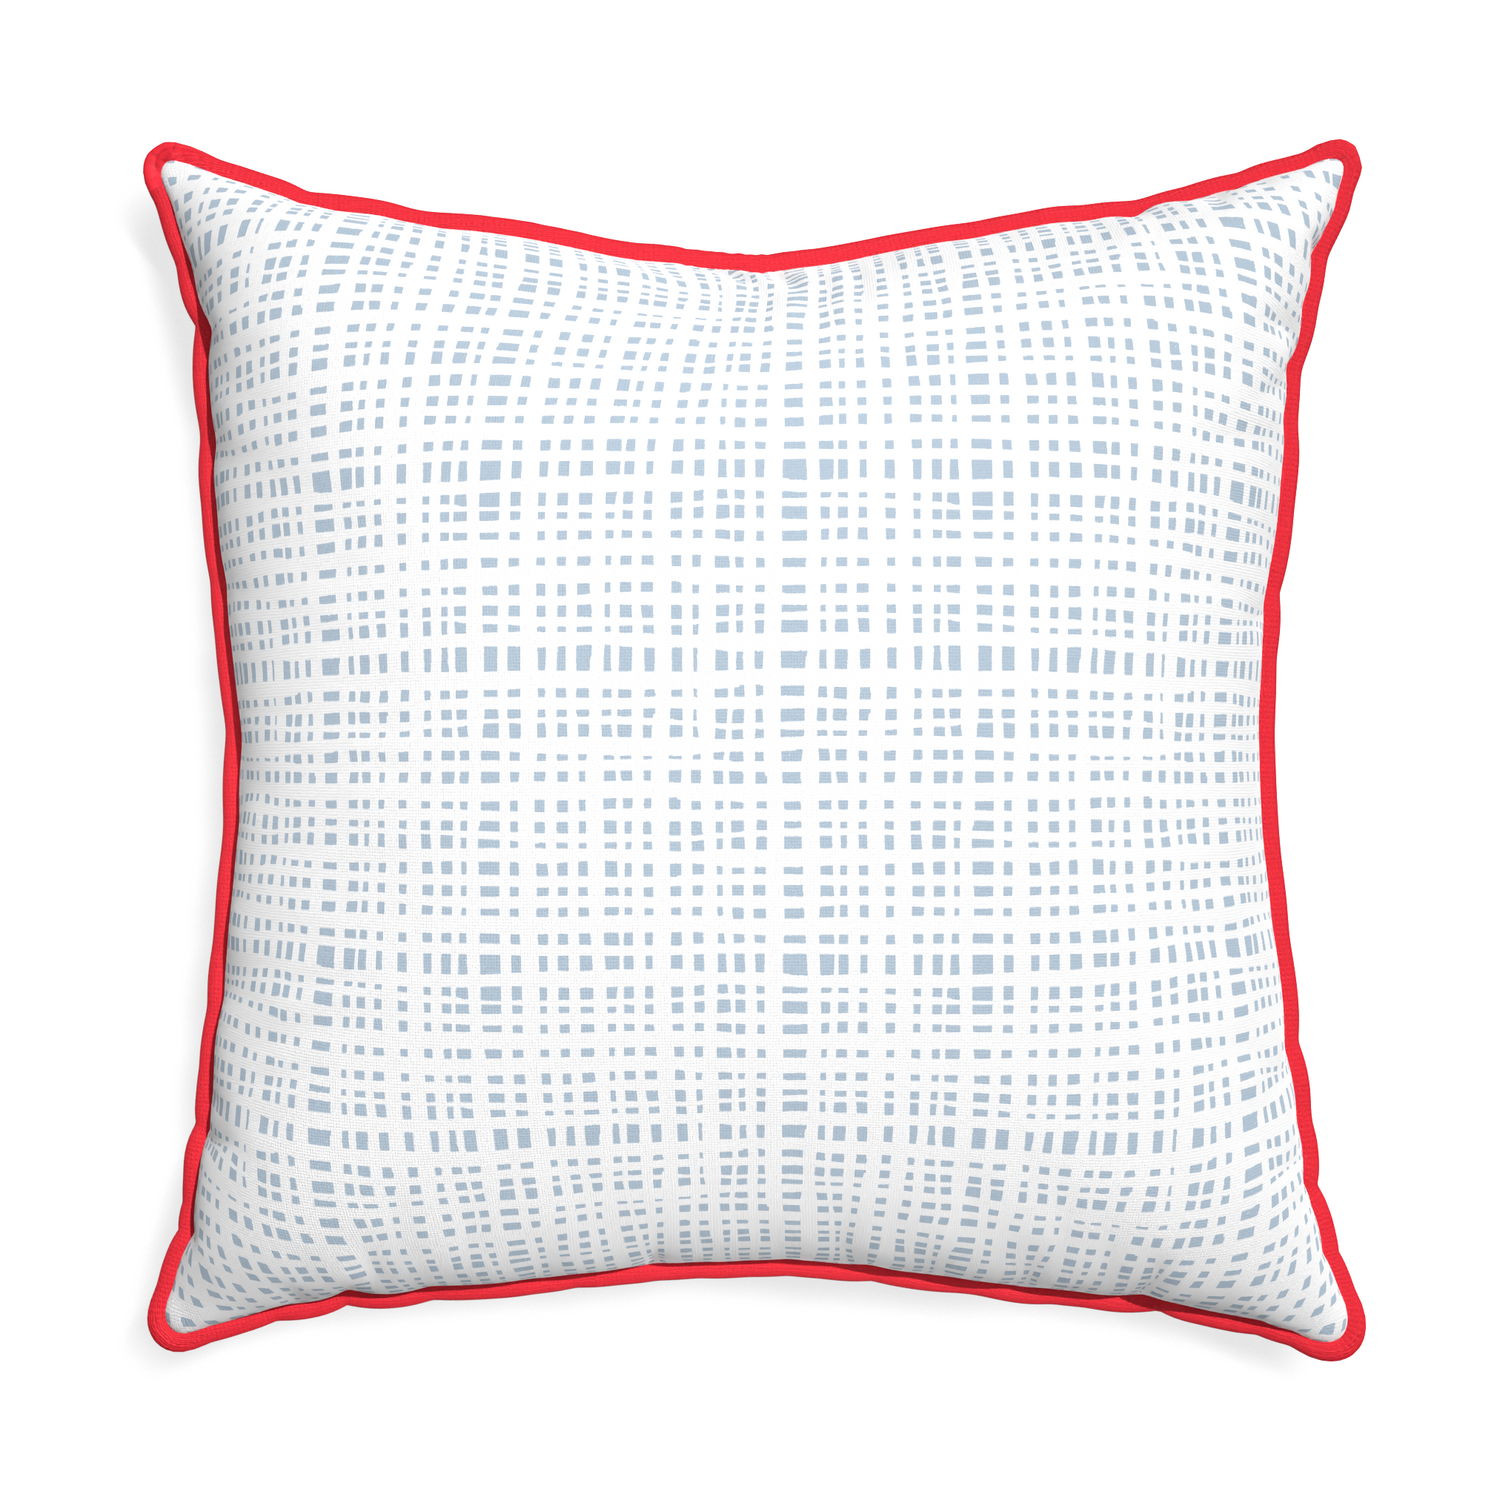 Euro-sham ginger custom plaid sky bluepillow with cherry piping on white background